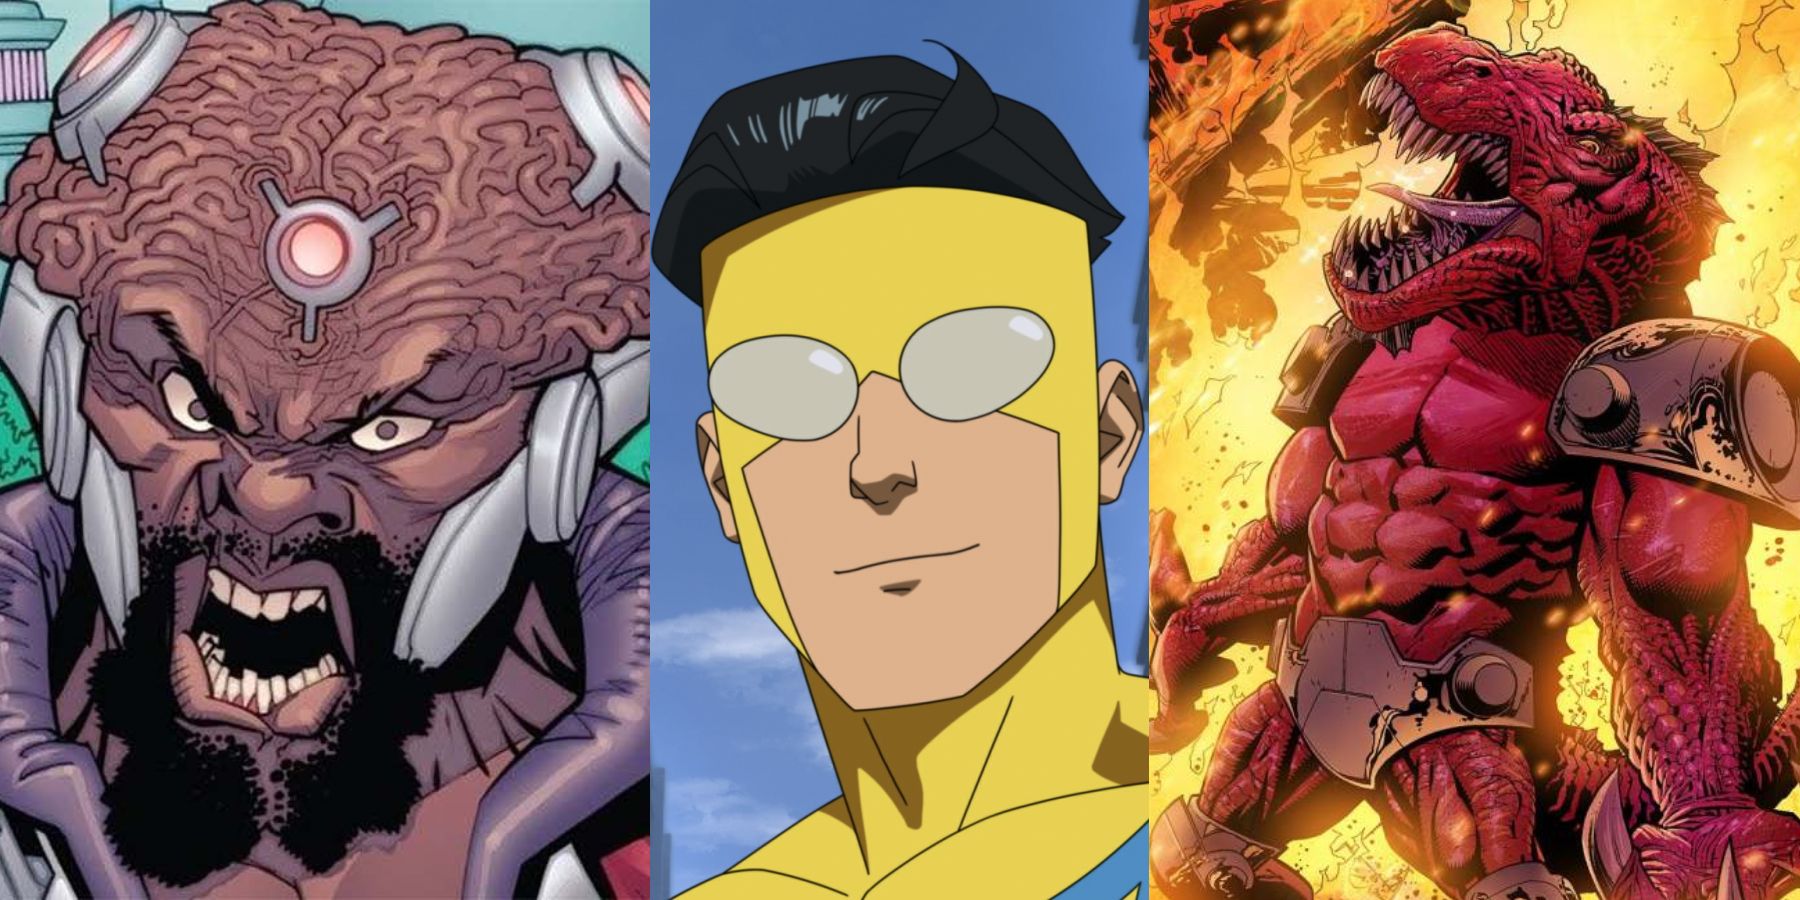 Invincible Season 2: Who is The Shapesmith?